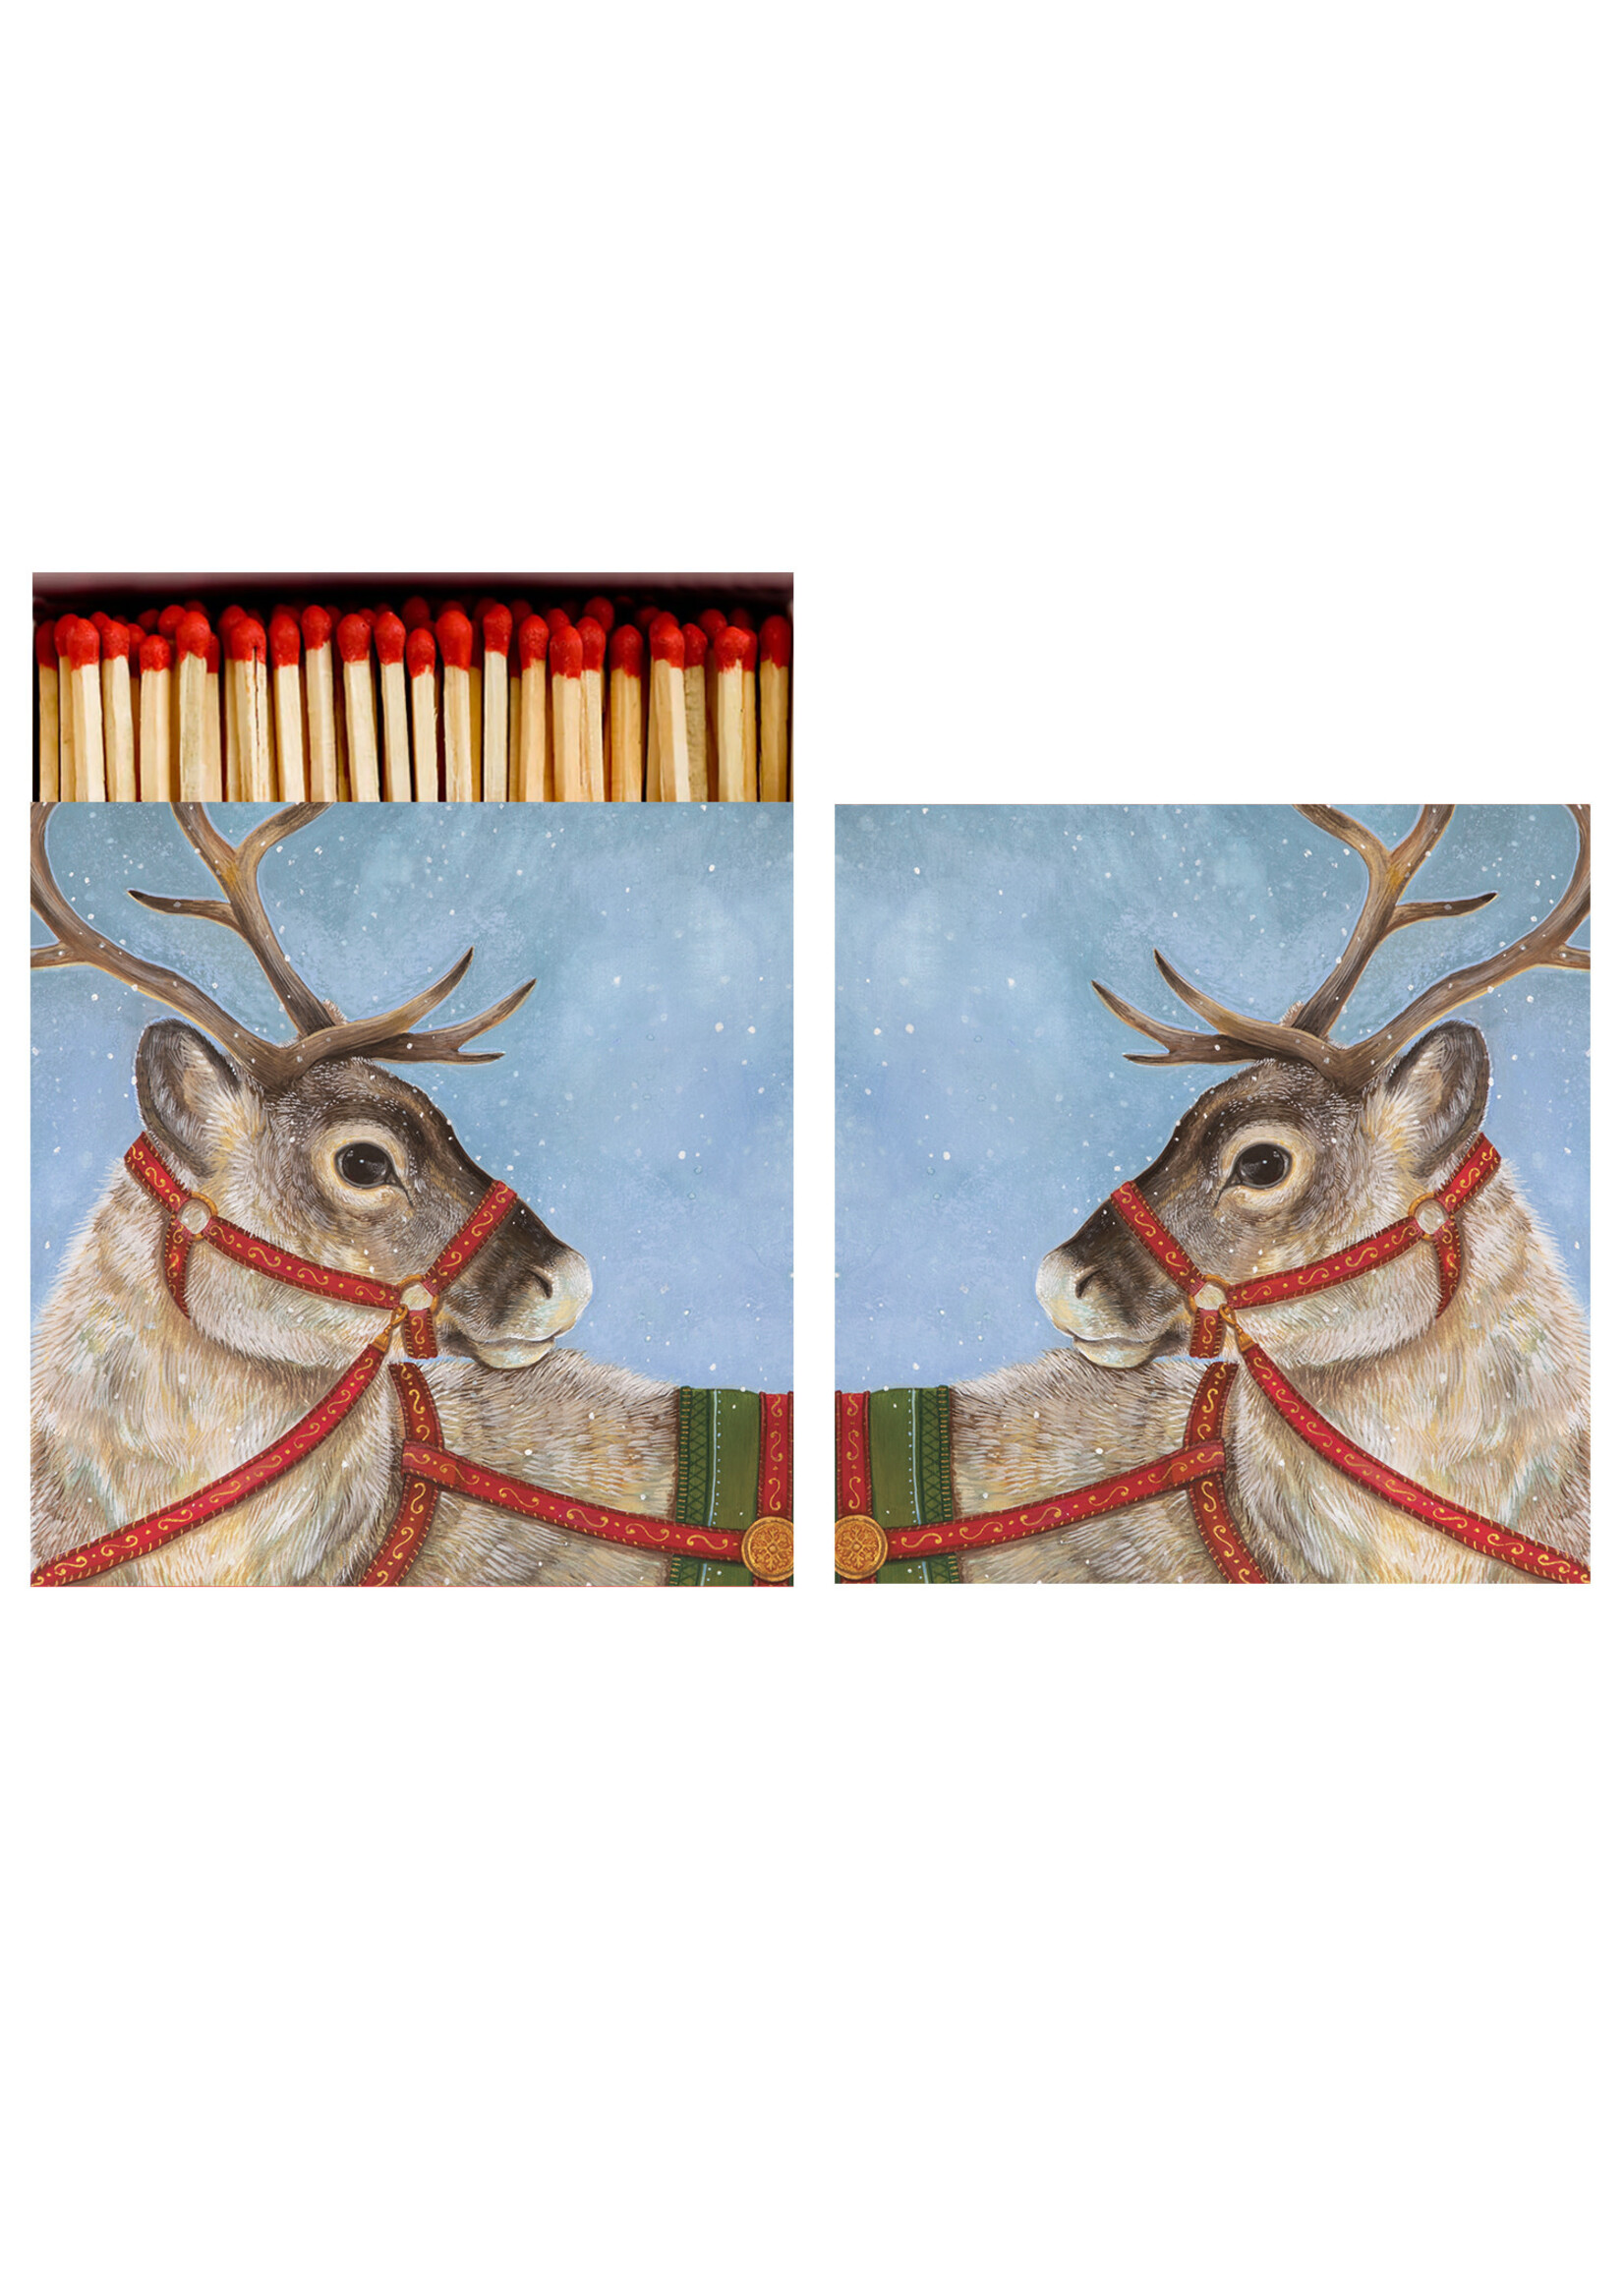 Hester & Cook Box of Matches - Dashing Reindeer